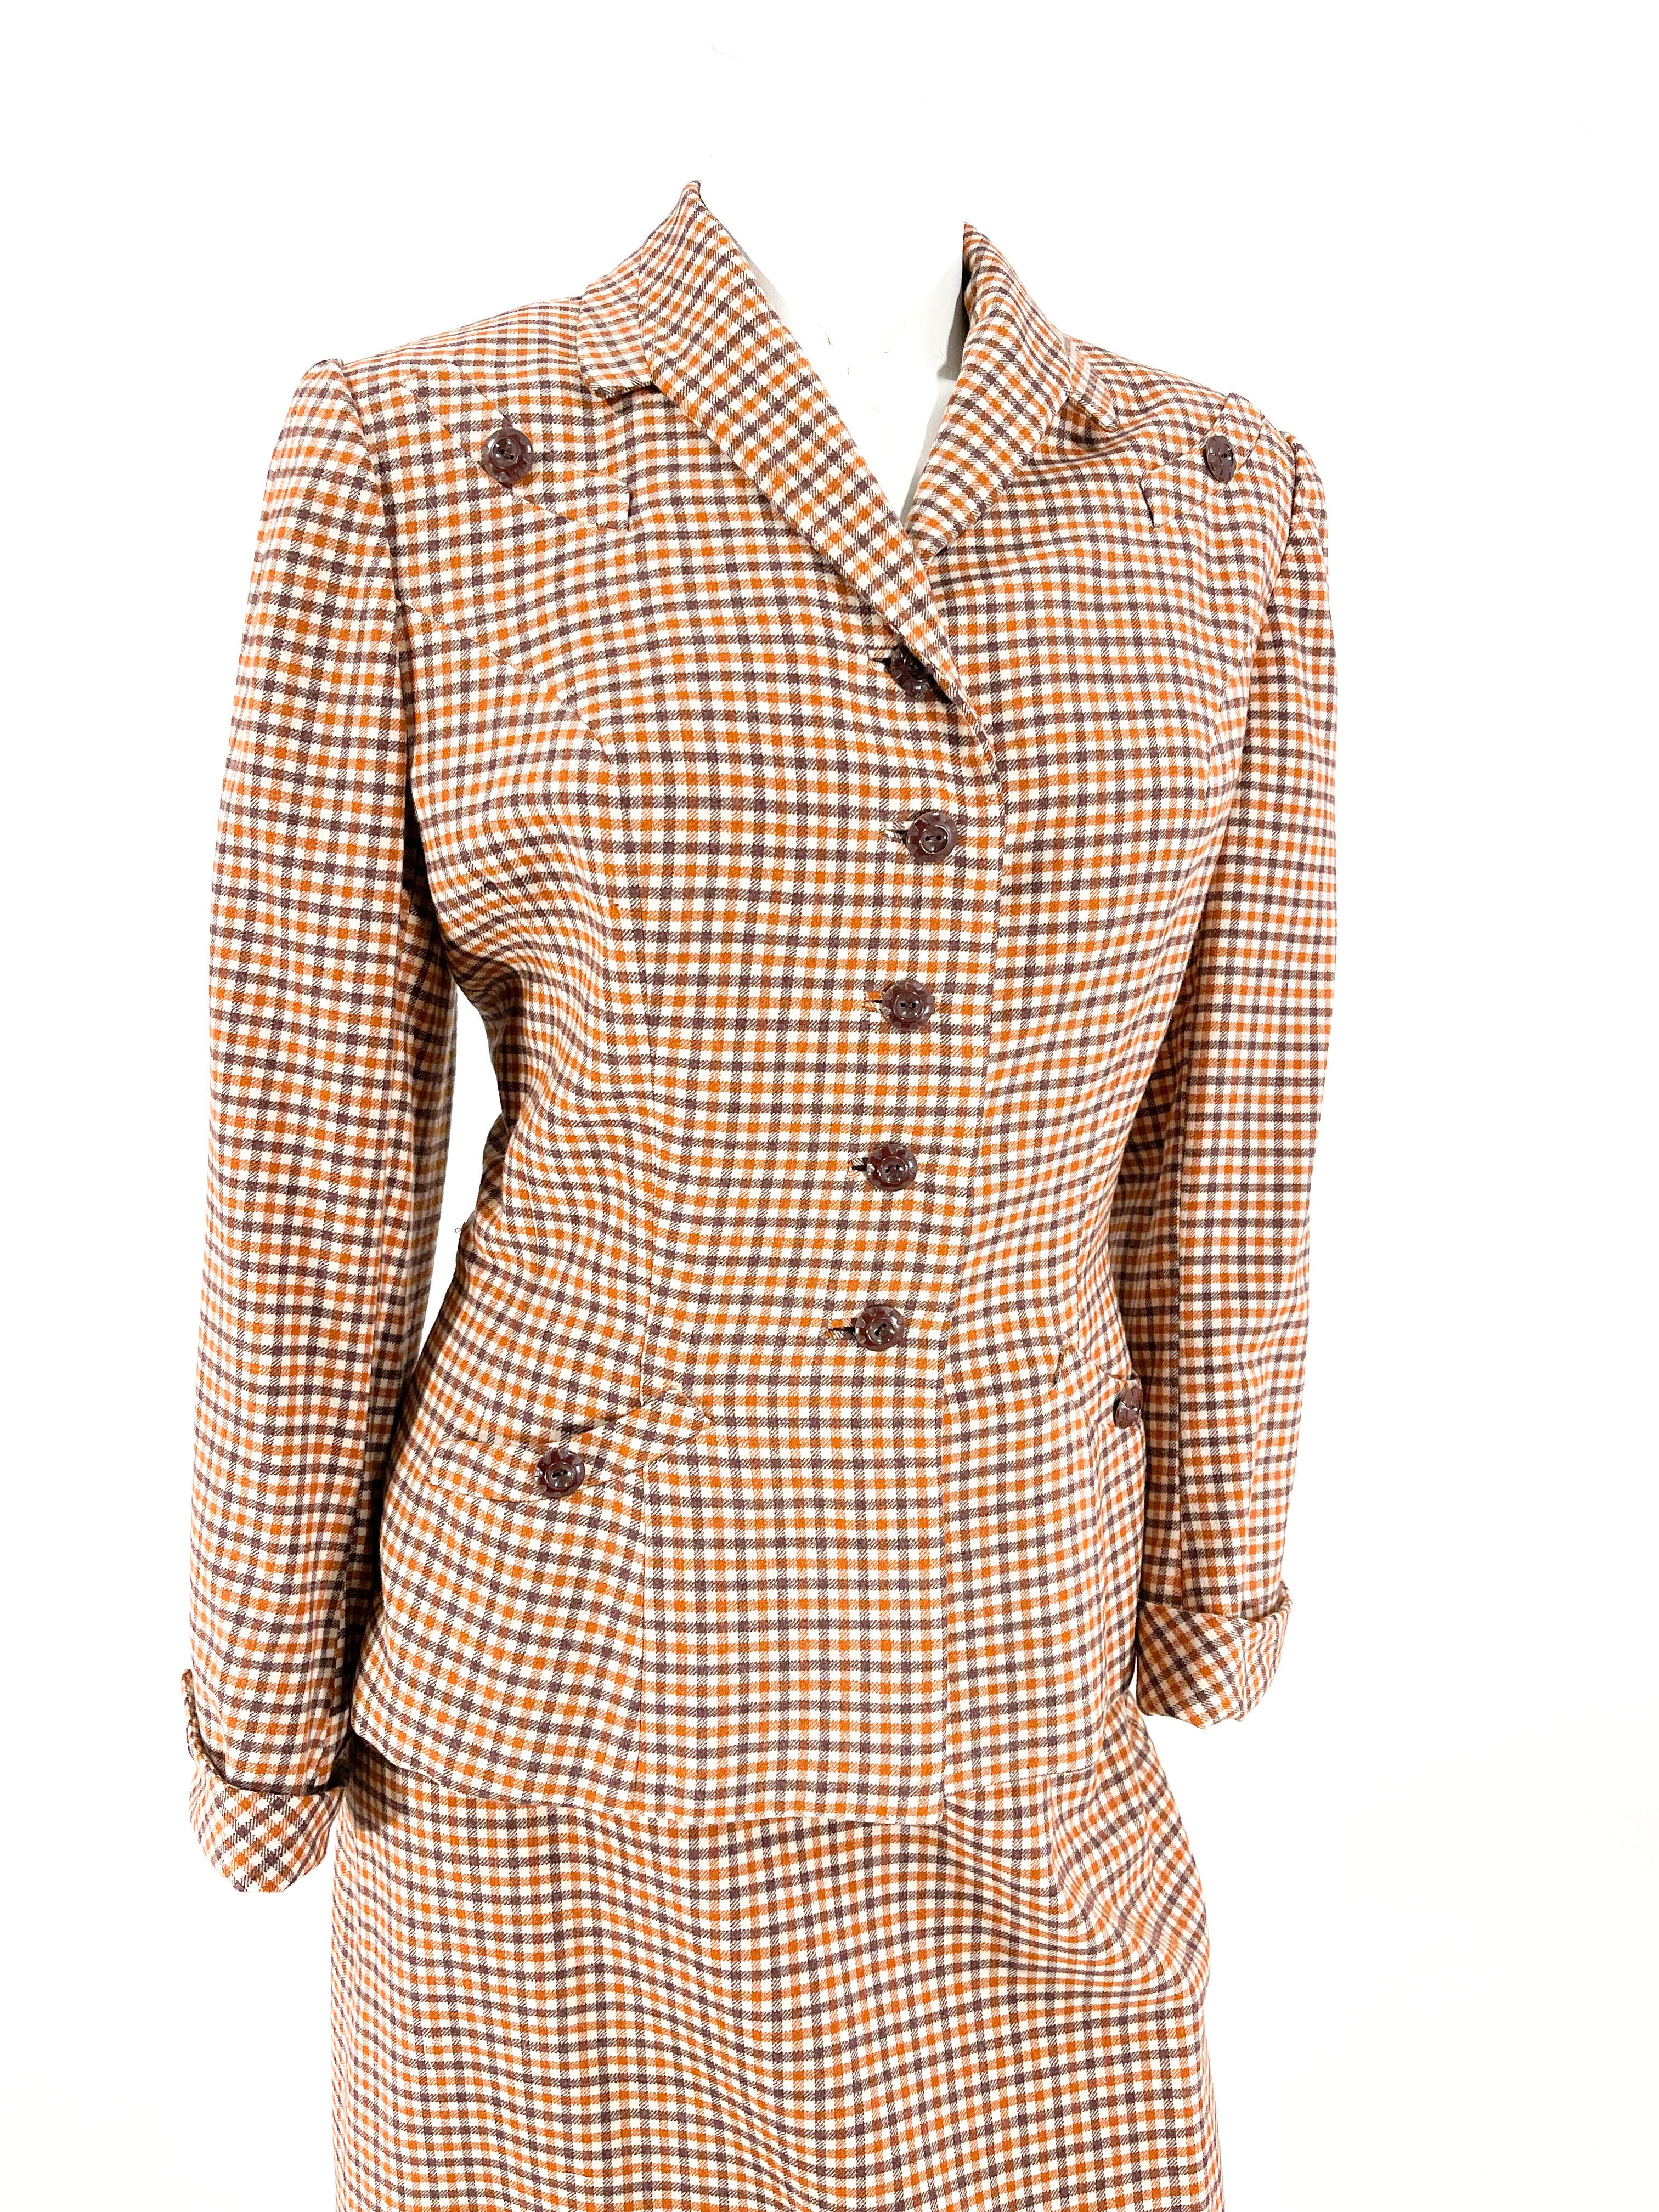 1940s off-white, brown, and rust plaid wool jacket and skirt suit. The Jacket of the suit features a modified notch collar, padded shoulders, two upper faux smile pockets, chocolate brown buttons, in-set button holes, fitted waist, and two lower